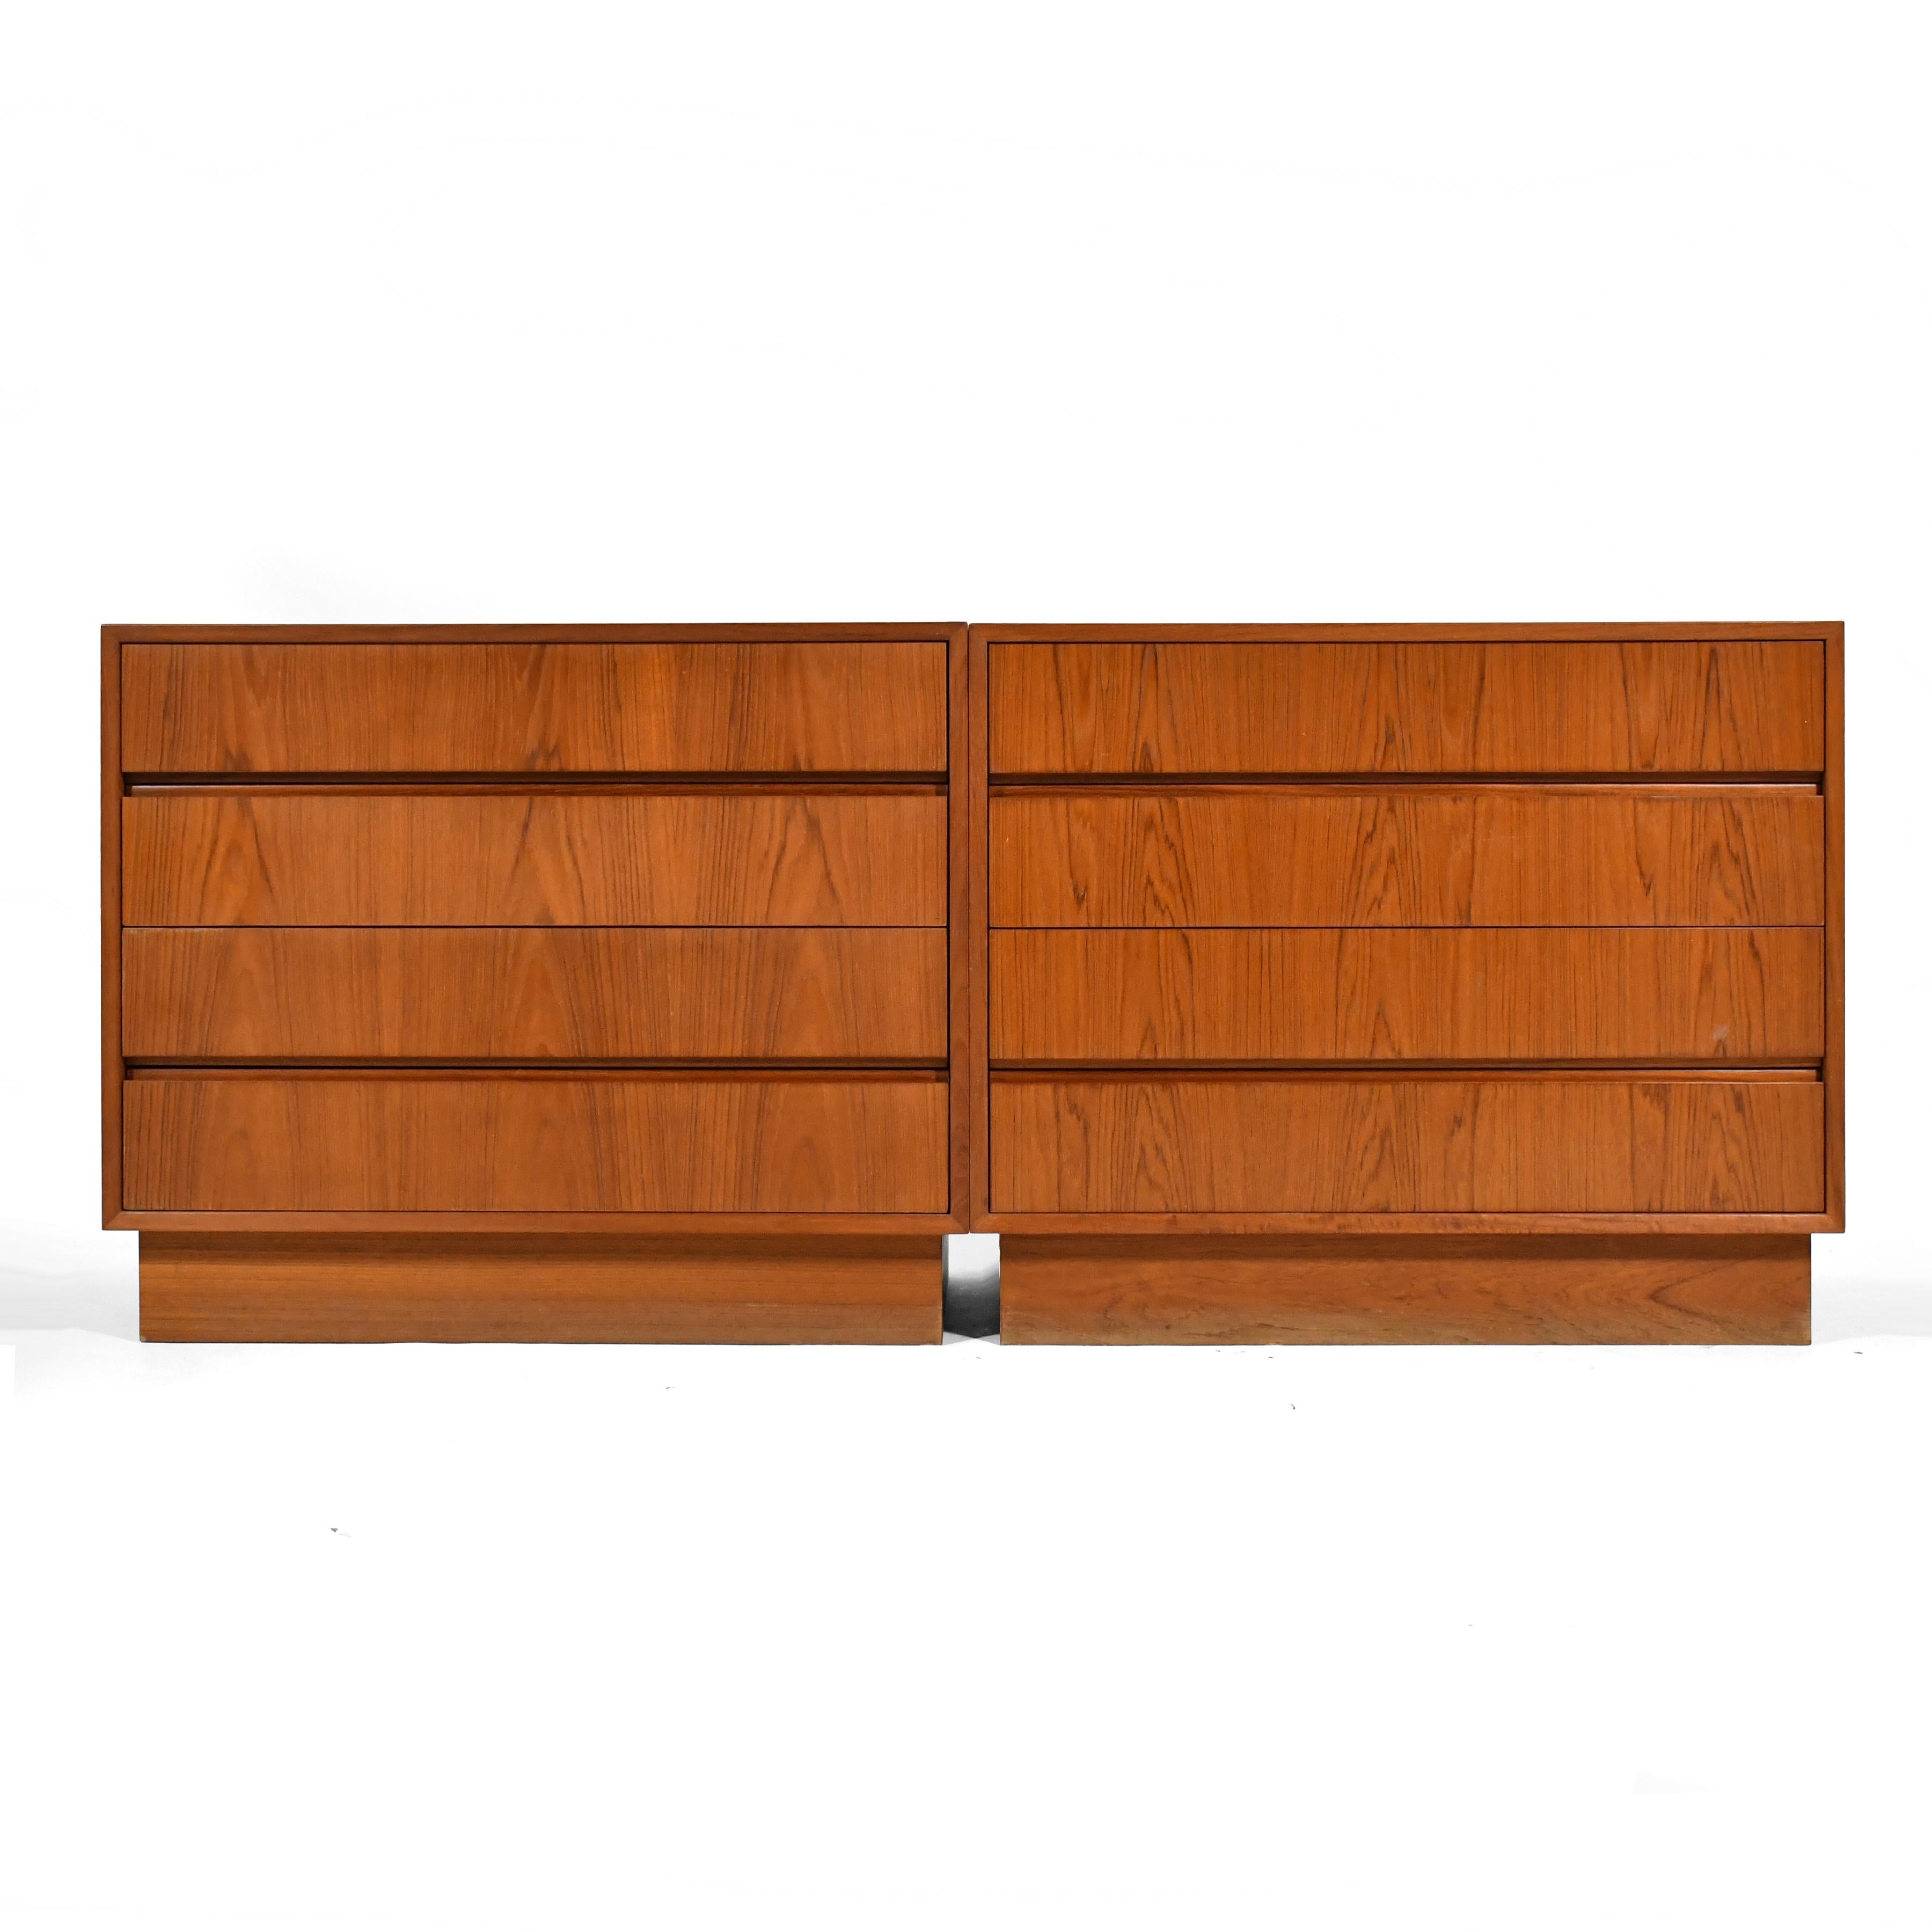 These two teak four drawer dressers can be used independently or in tandem to create one long dresser. Clad in beautifully figured wood, with integrated pulls, they are a study in subtle beauty. Price is for the pair.

Measures: 29.75